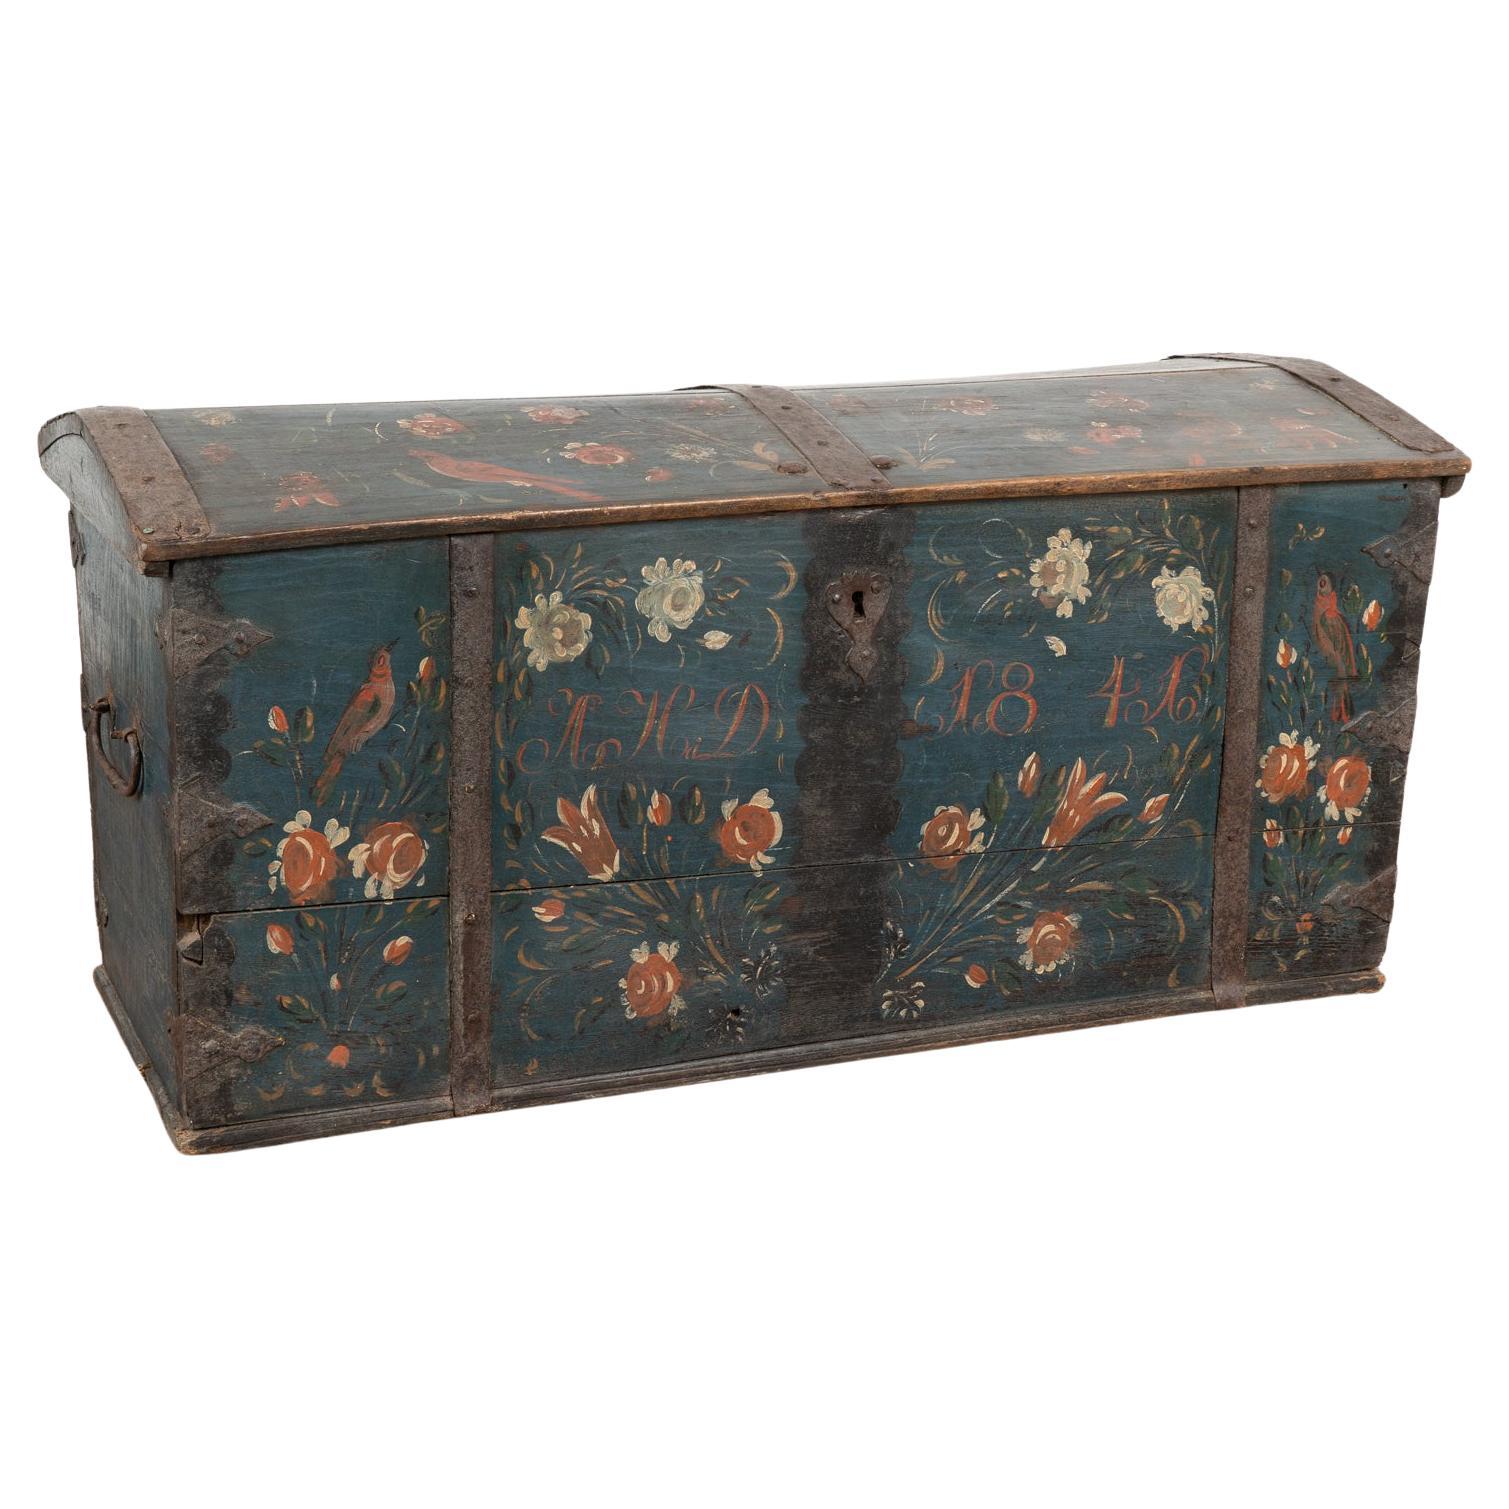 Original Painted Blue Dome Top Trunk with Birds and Flowers, Sweden dated 1841